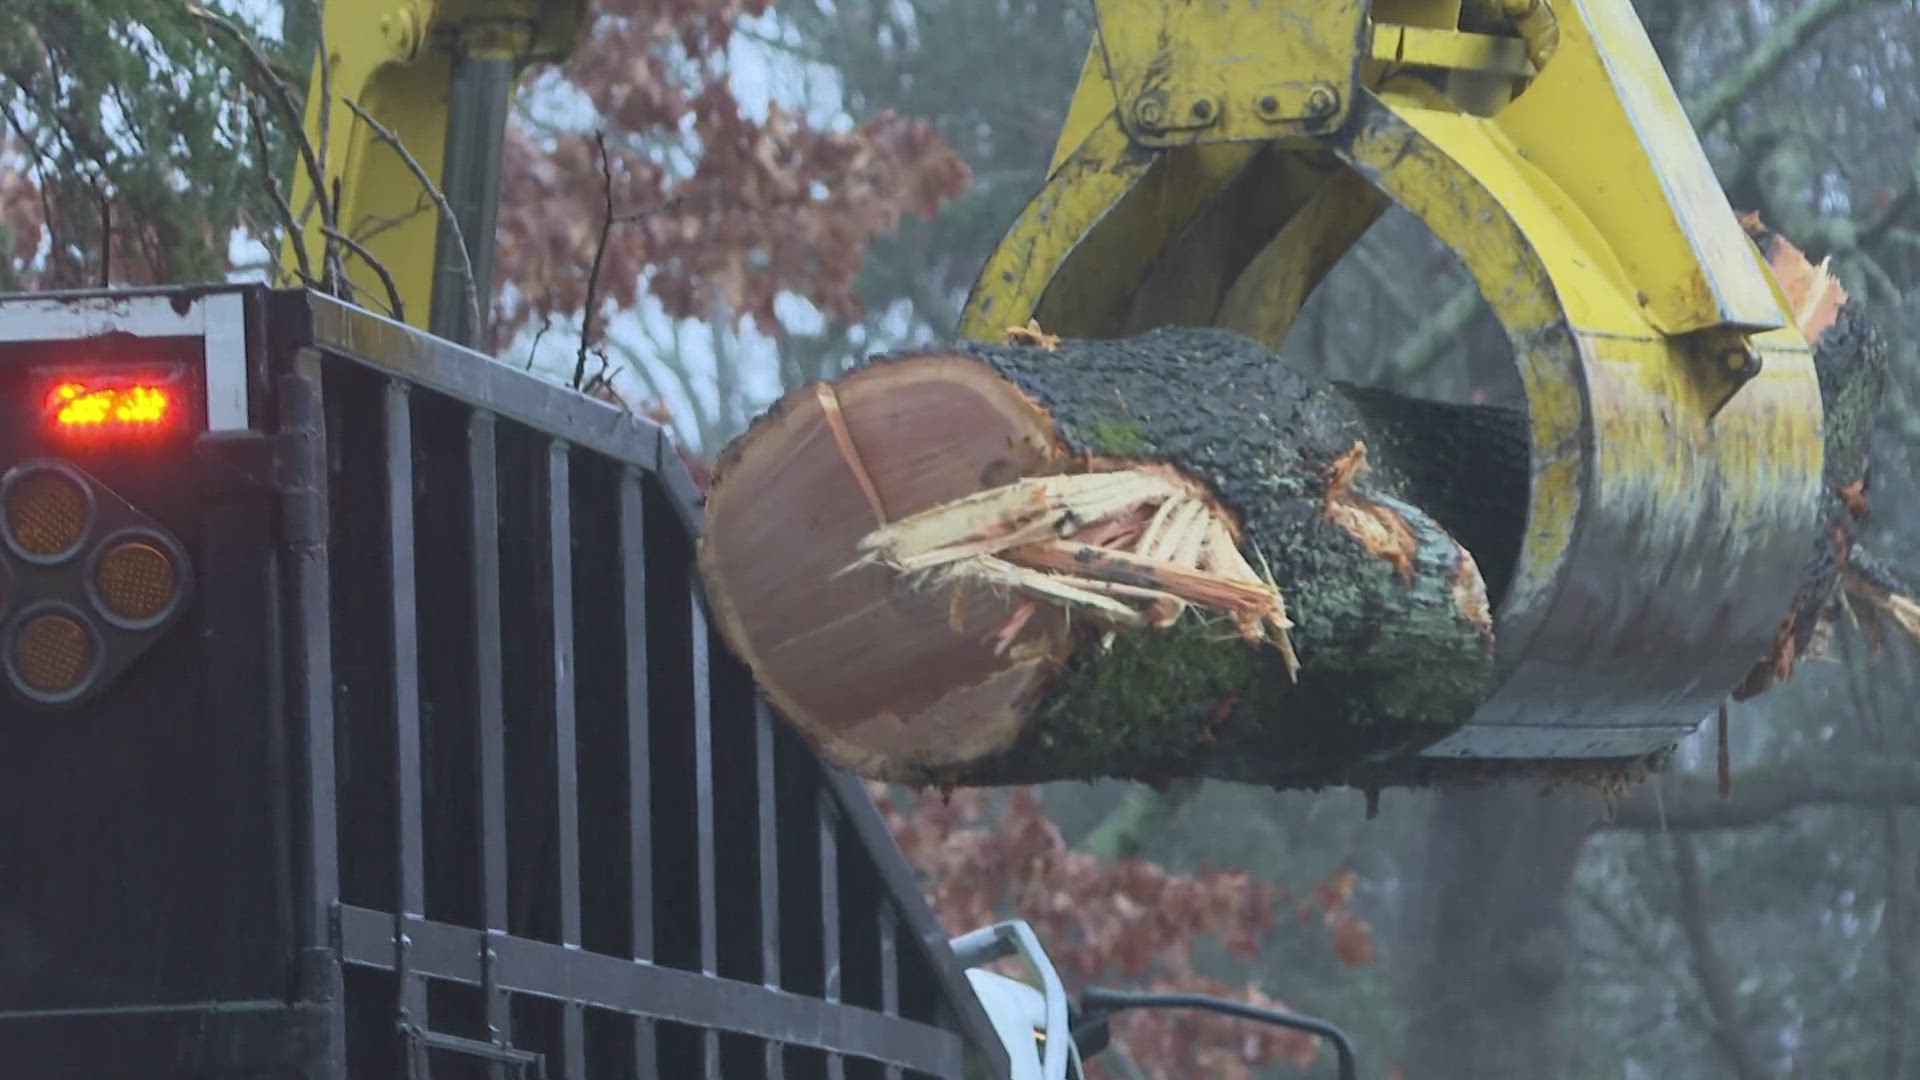 A tree nearly collapsed onto a man’s home.